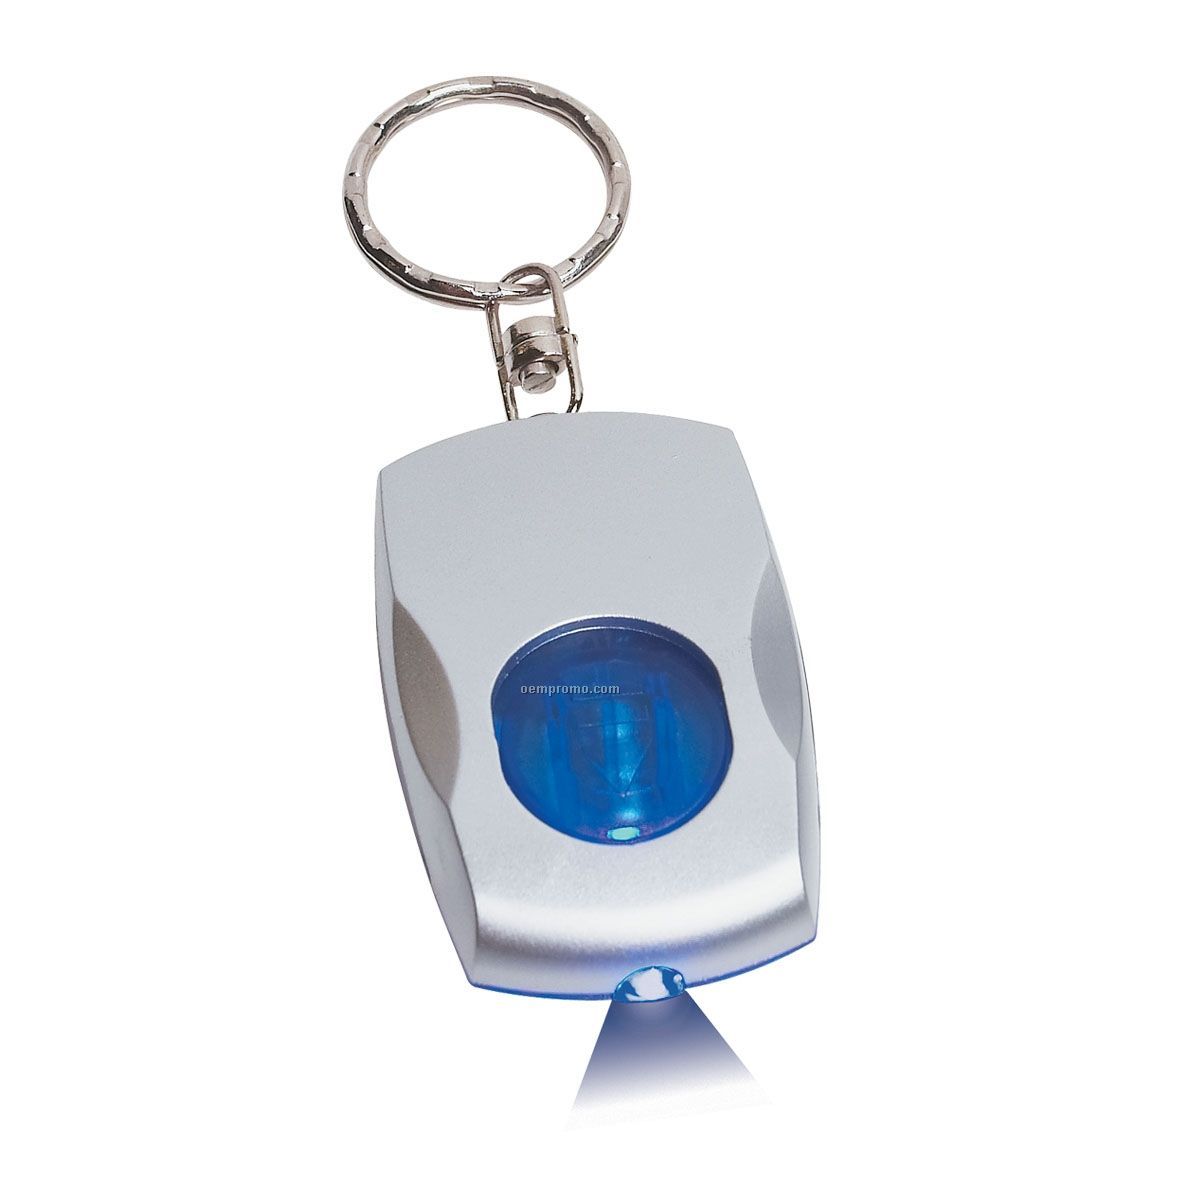 Light Up Keychain - Silver W/ Blue Accents & White LED